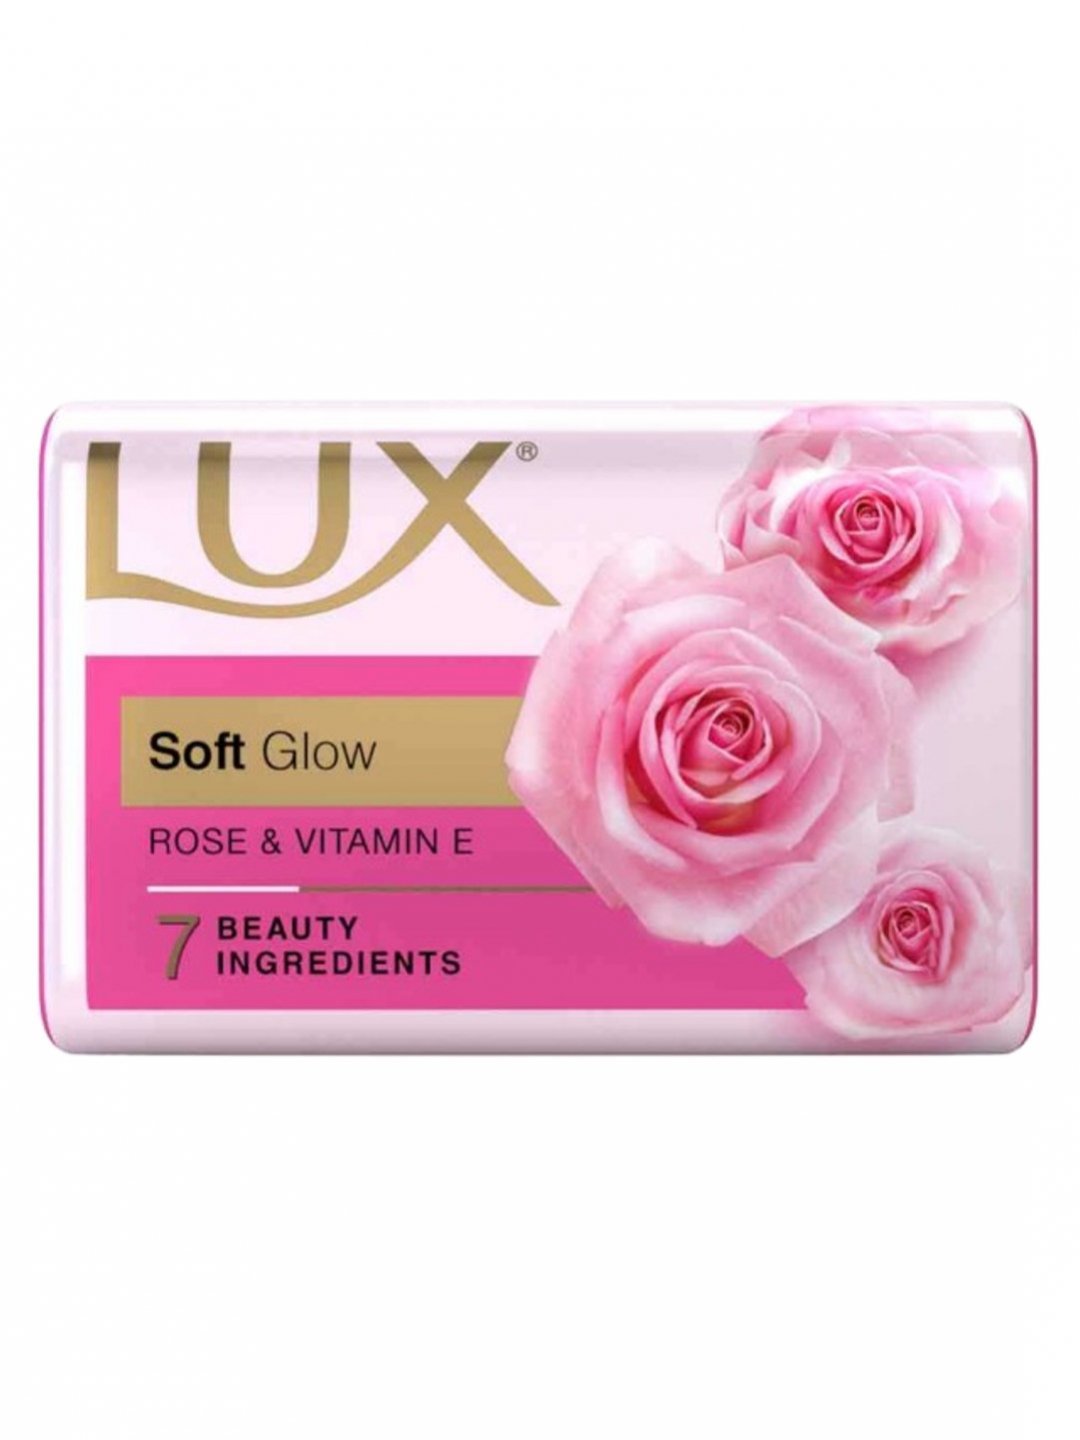 Lux Soft Glow with Rose & Vitamin E Soap, 150g (Pack of 3)